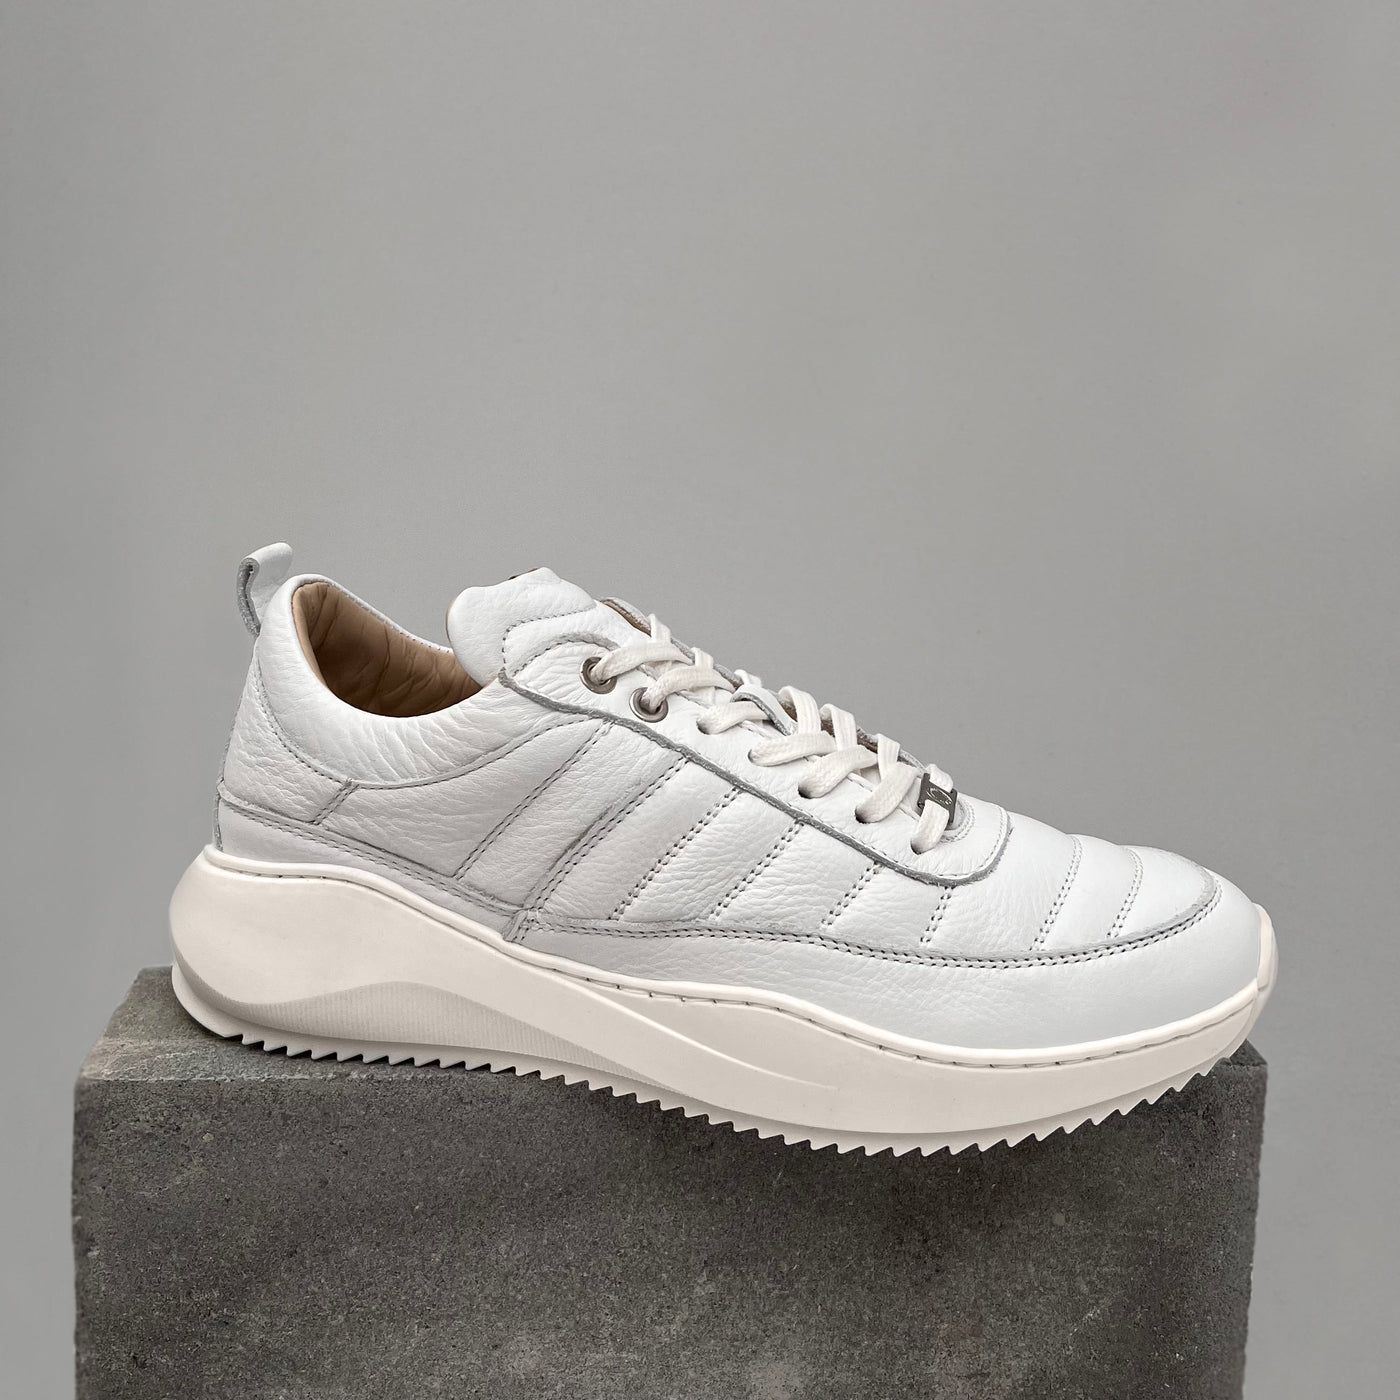 PACE PADDED LOW White - Leather Plain - HINSON | ALPINA